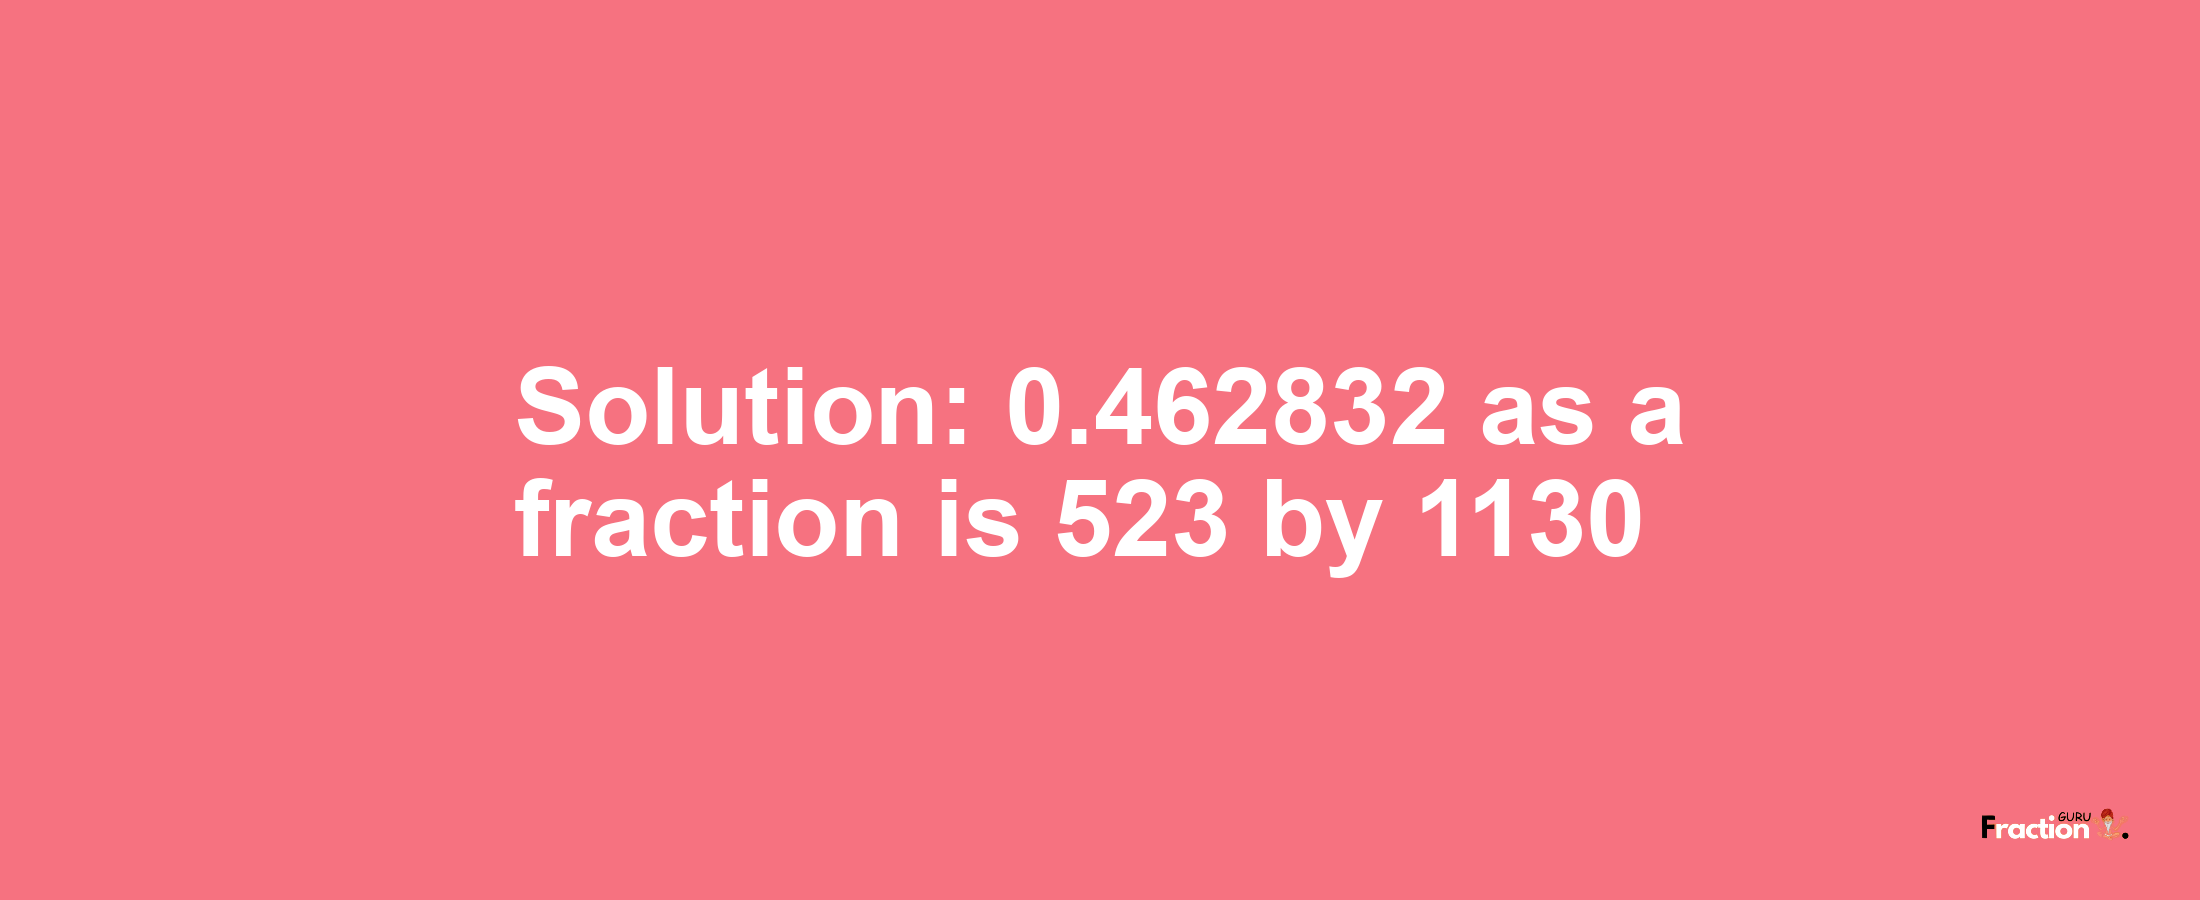 Solution:0.462832 as a fraction is 523/1130